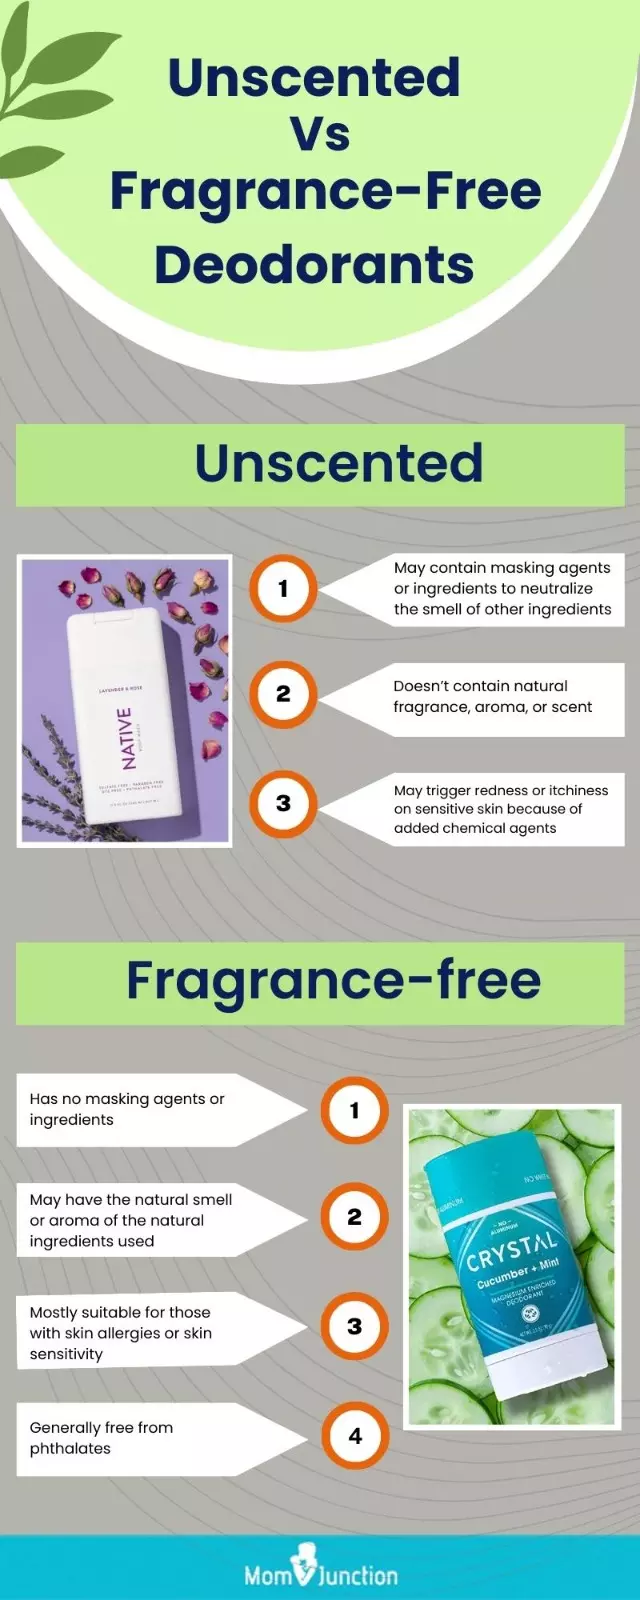 Unscented Vs. Fragrance-Free Deodorants done